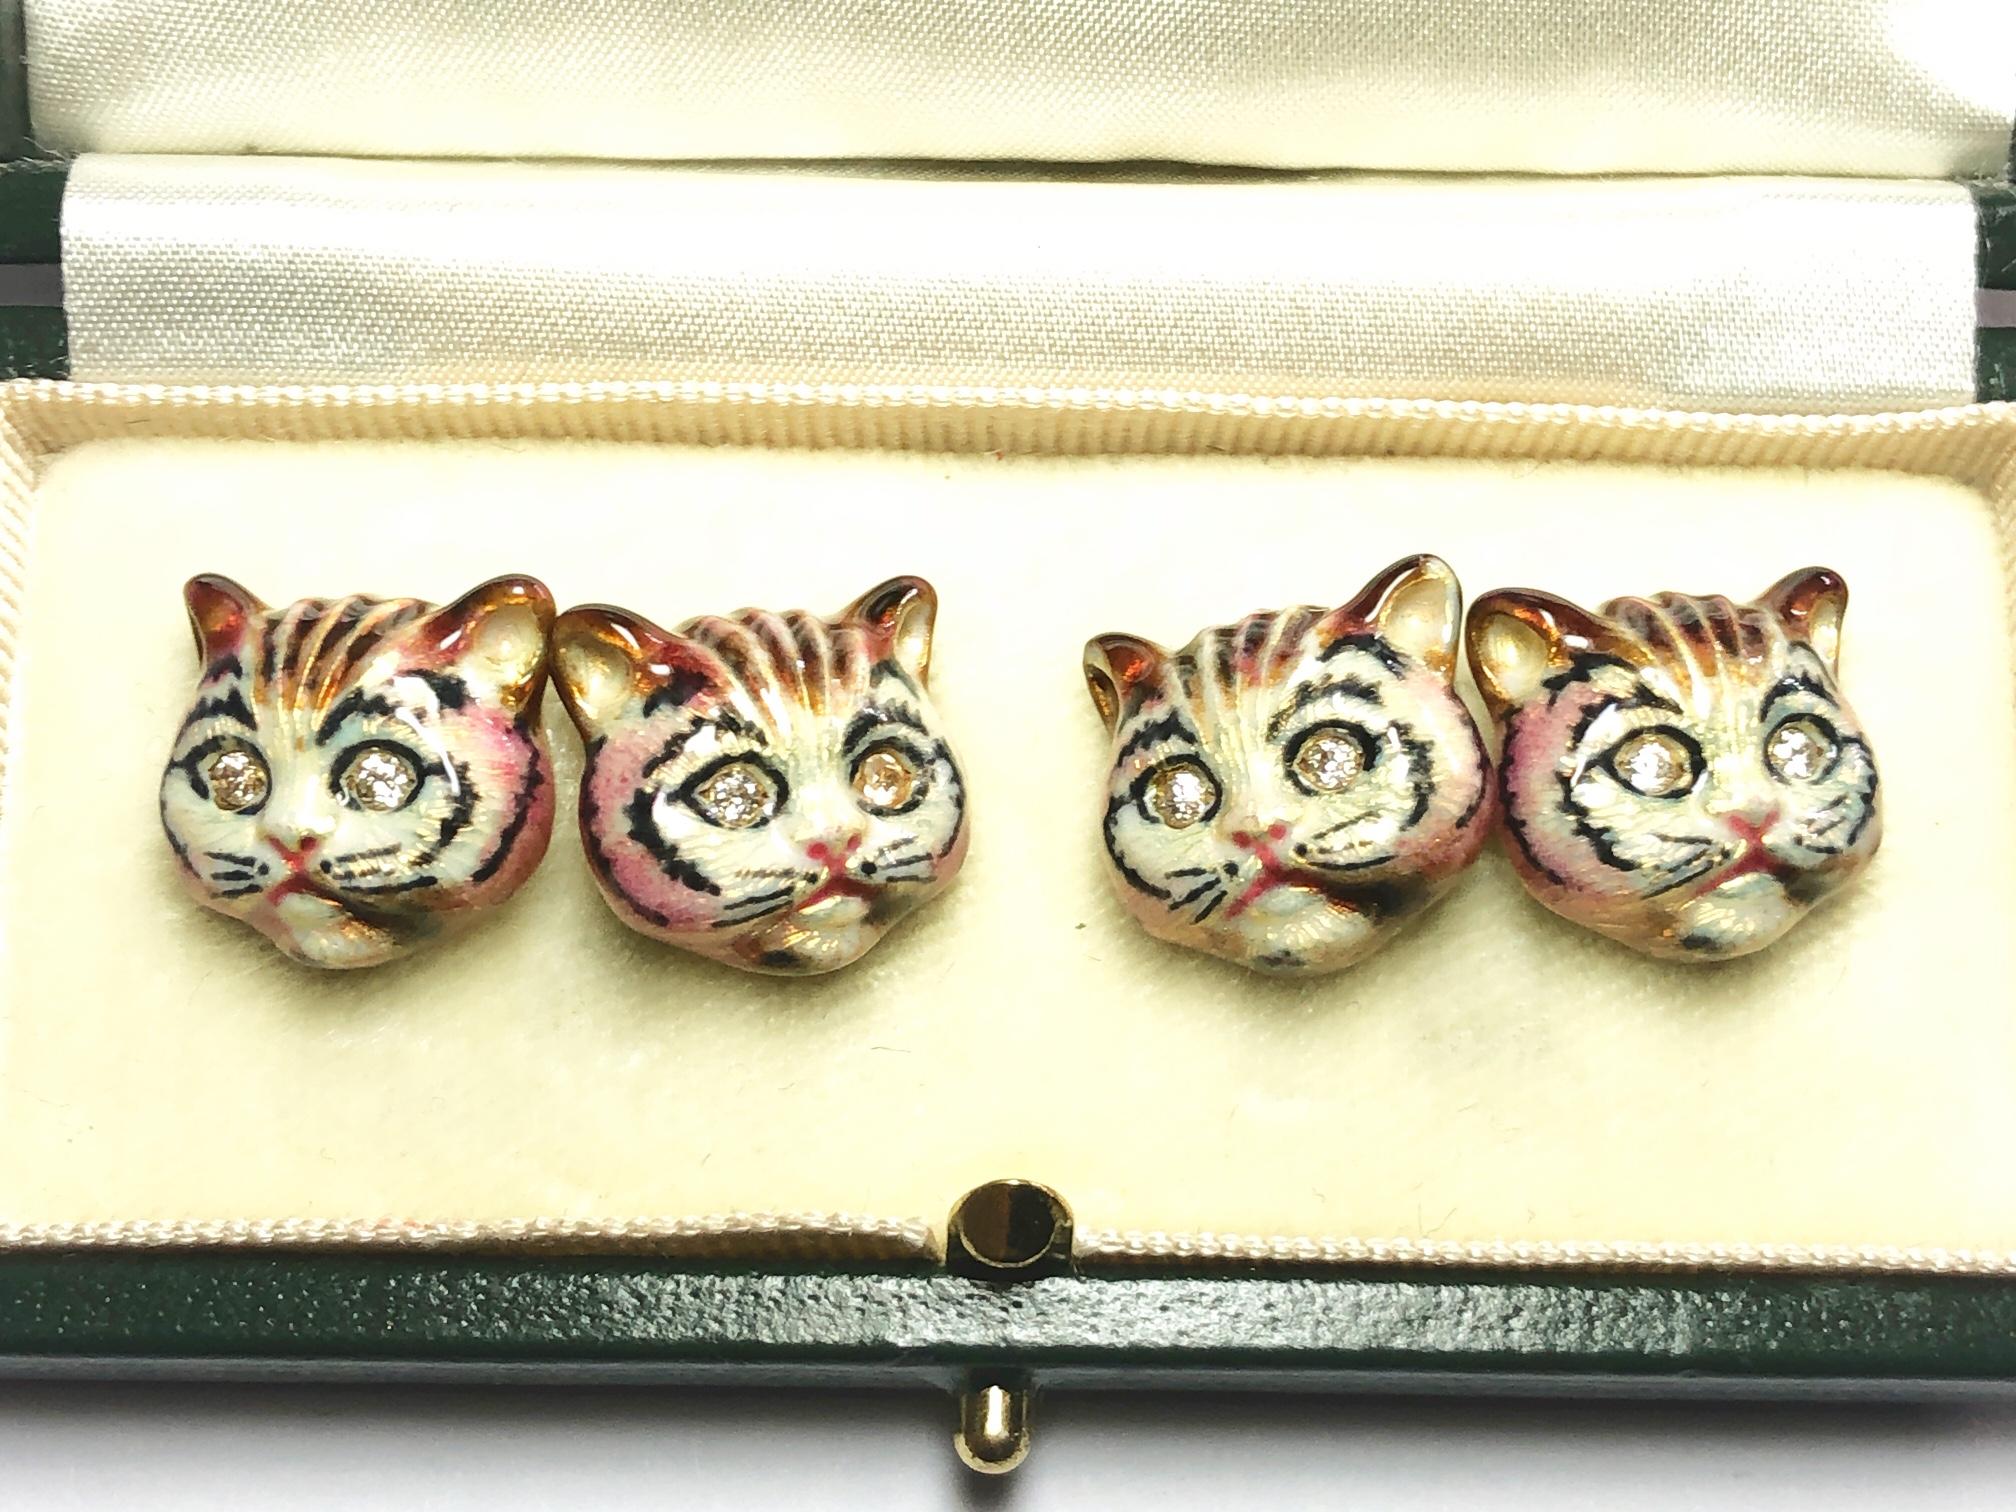 A pair of modern, enamel, cat cufflinks, with brown, cream, black and pink enamel, representing tabby markings, with round brilliant-cut and old-cut diamond set eyes, mounted in 18ct gold, with link fittings, signed Moira. The head of each cat